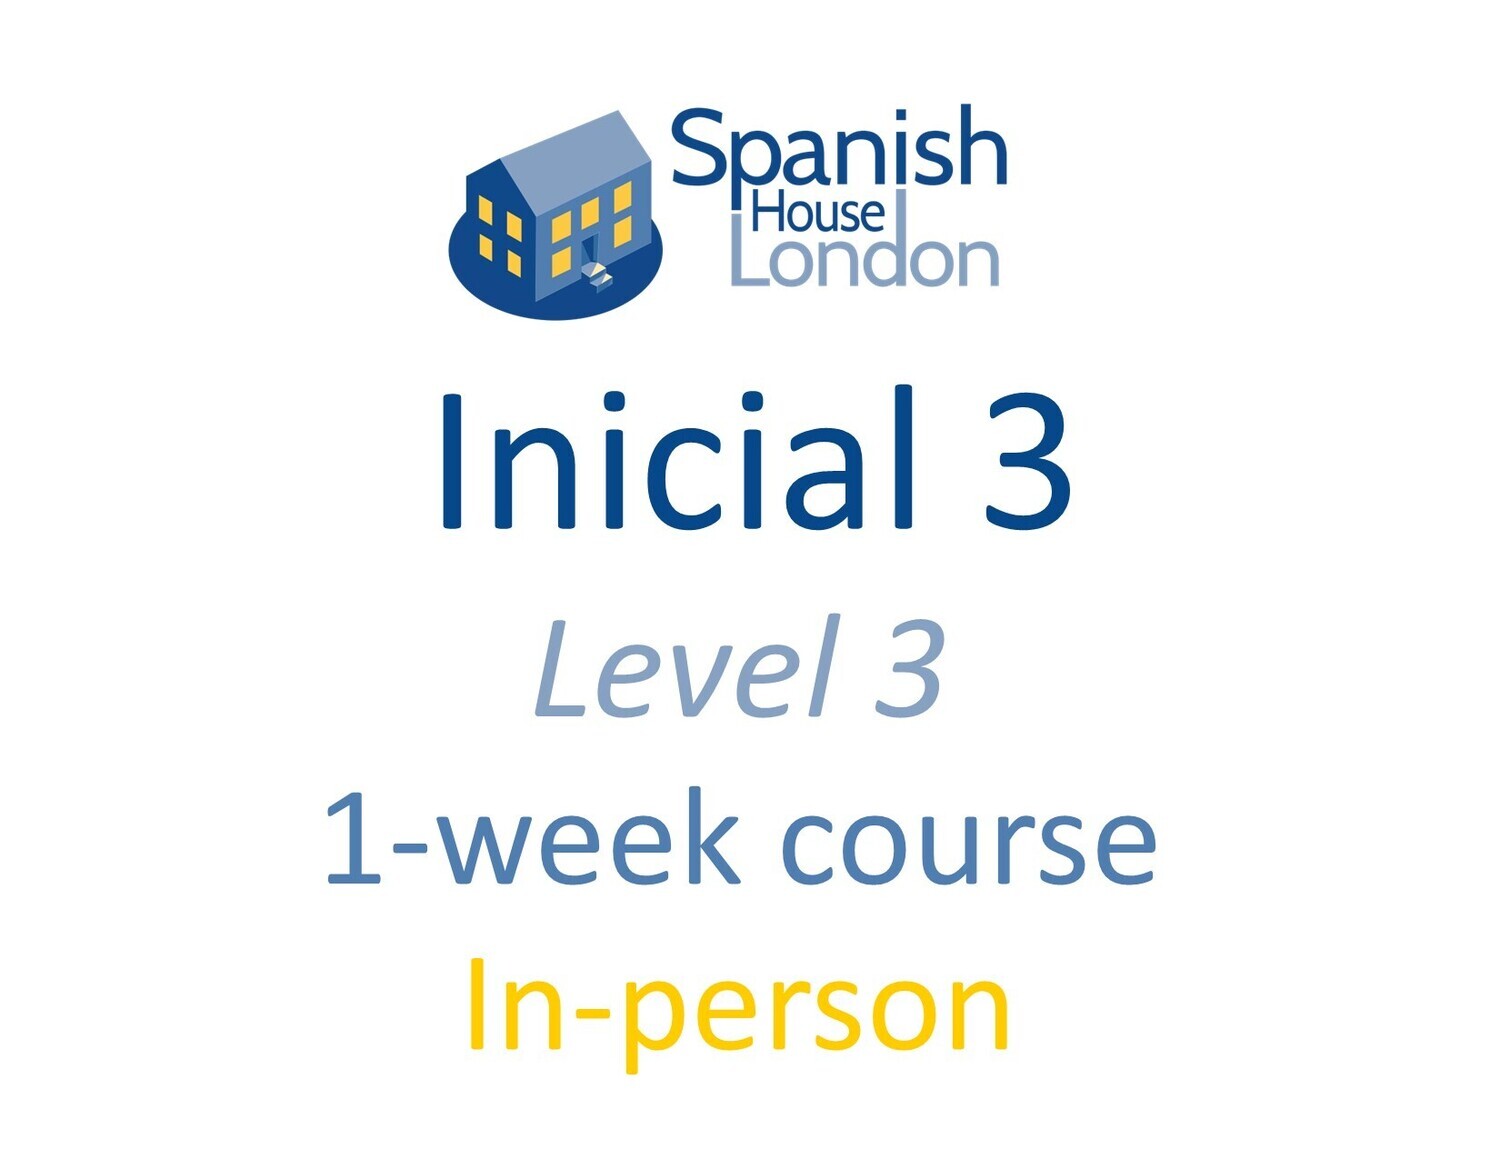 One-Week Intensive Inicial 3 Course starting on 26th September at 10.30am in Clapham North